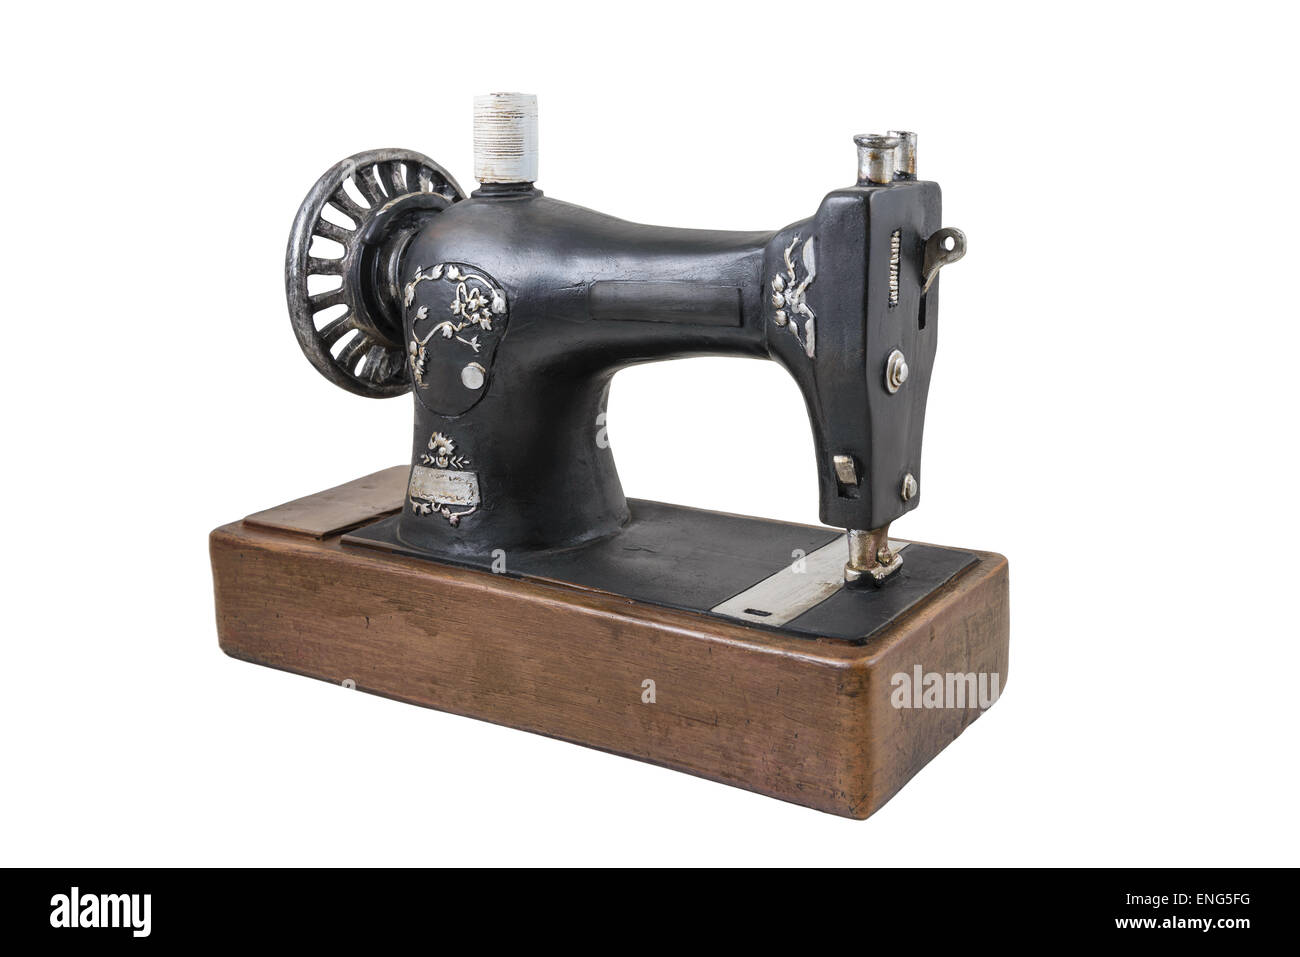 The  model of sewing machine is photographed on a white background Stock Photo